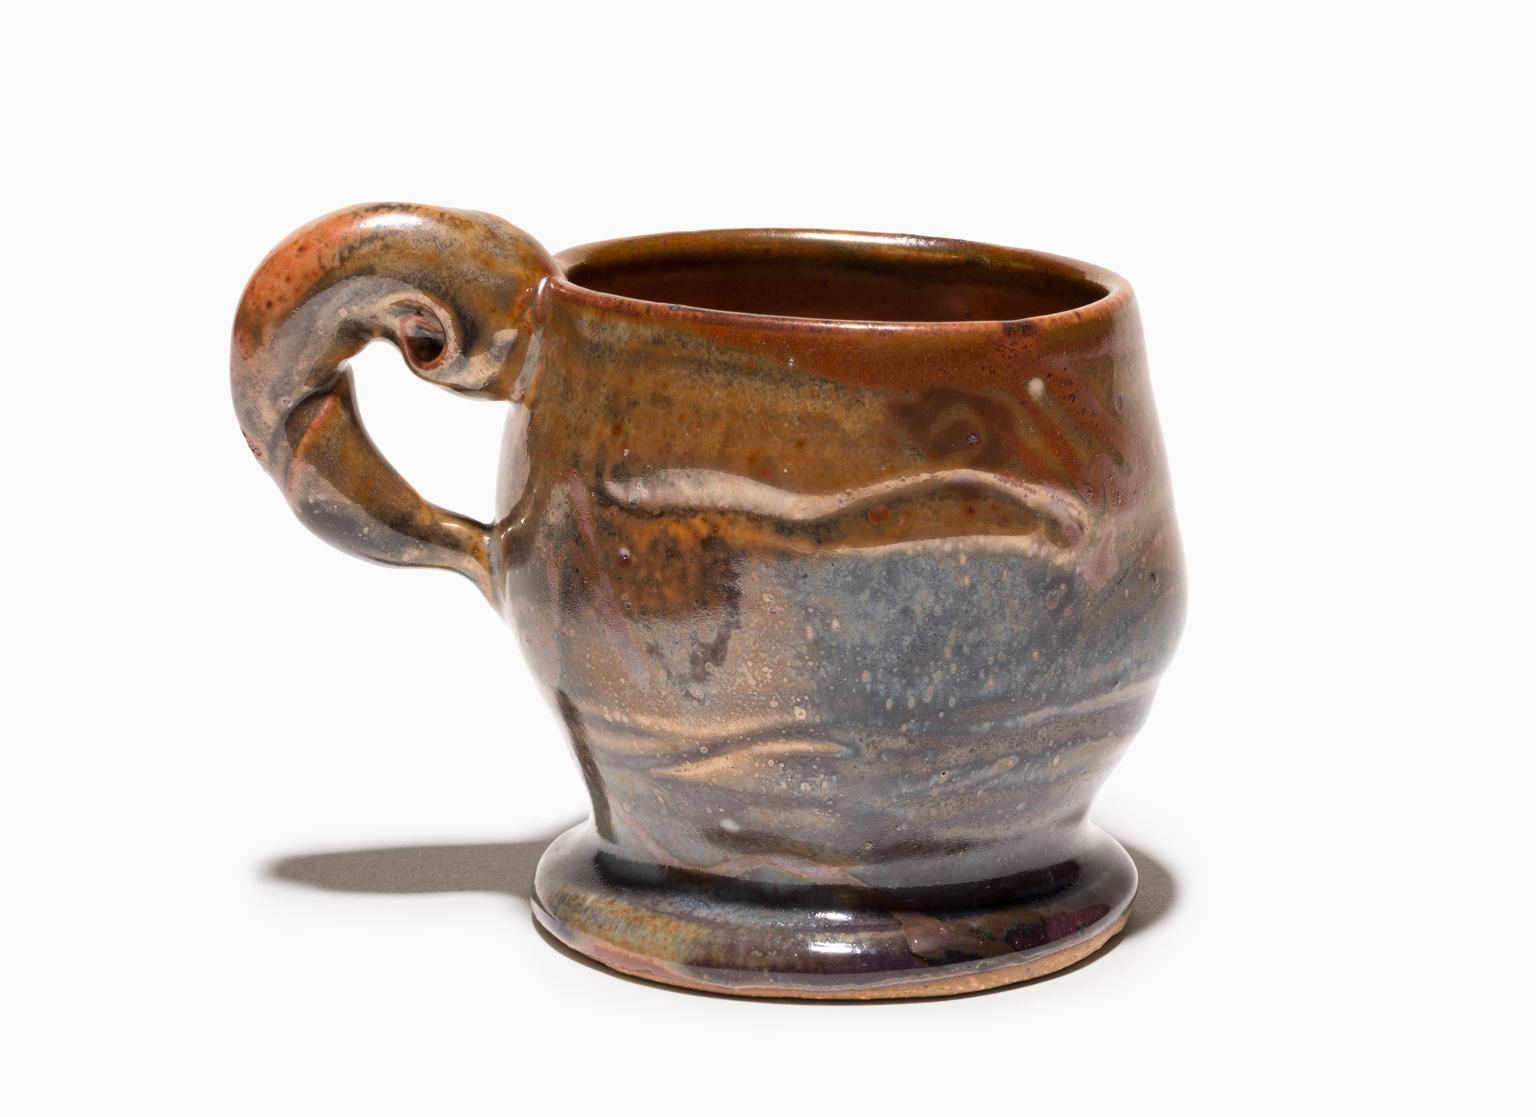 John Glick Plum Street Pottery Reduction Fired Shino Glaze Cup Published in Book